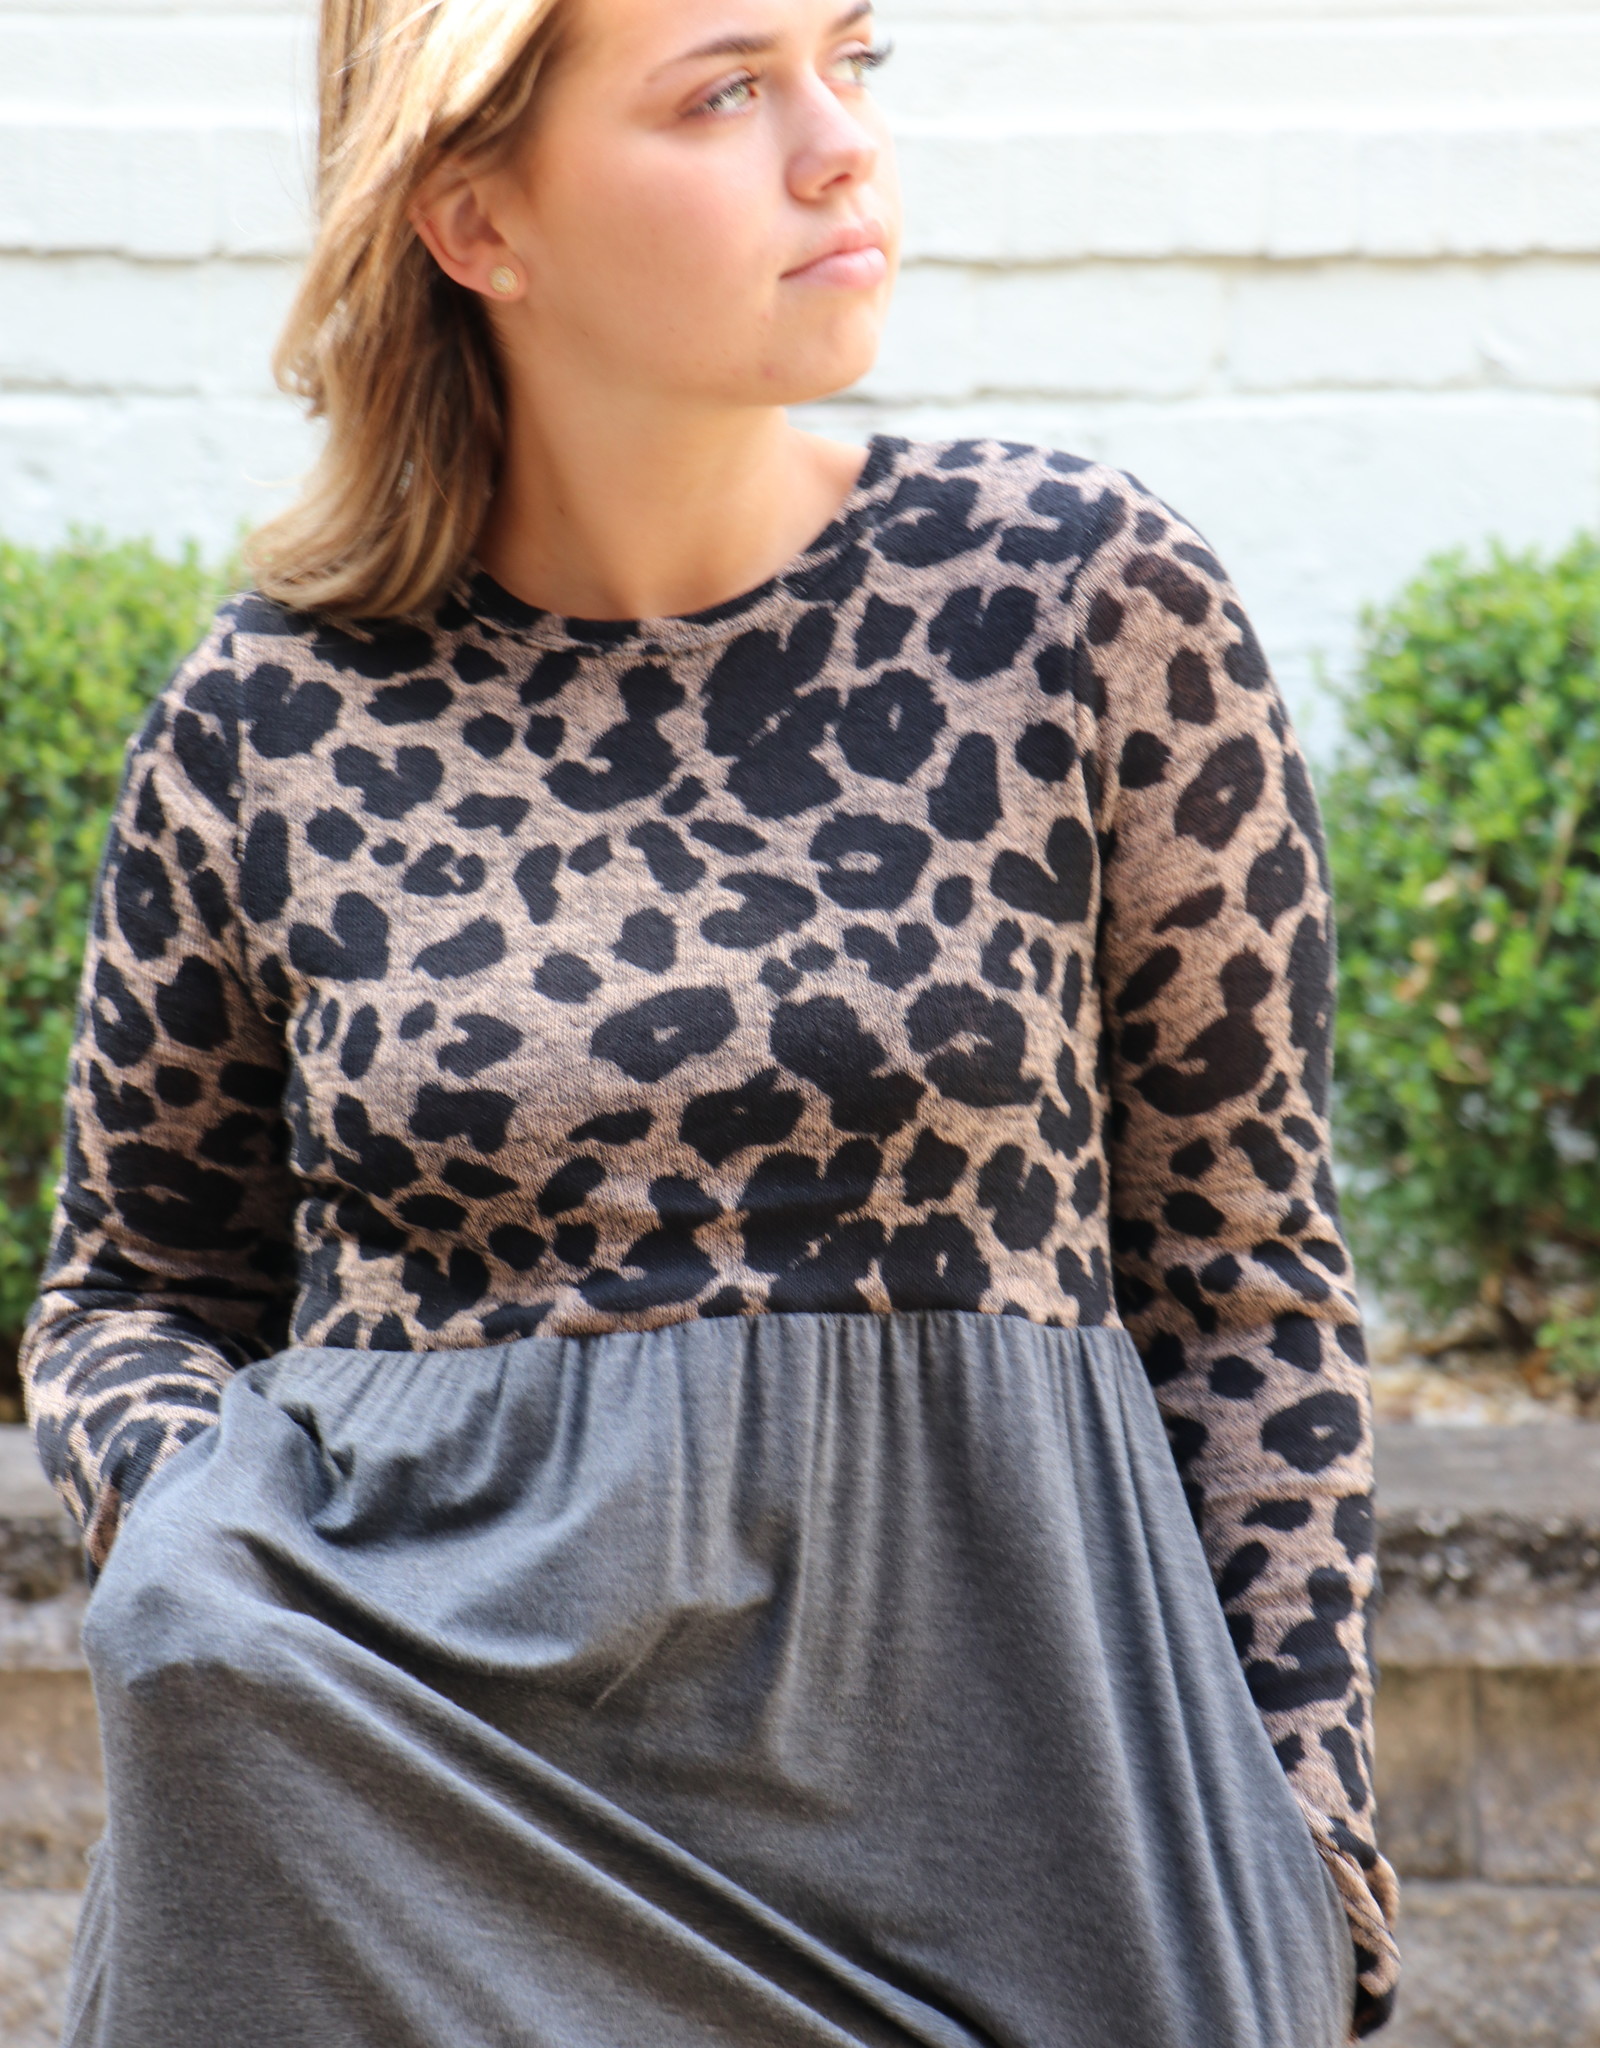 The Spotted Midi Dress